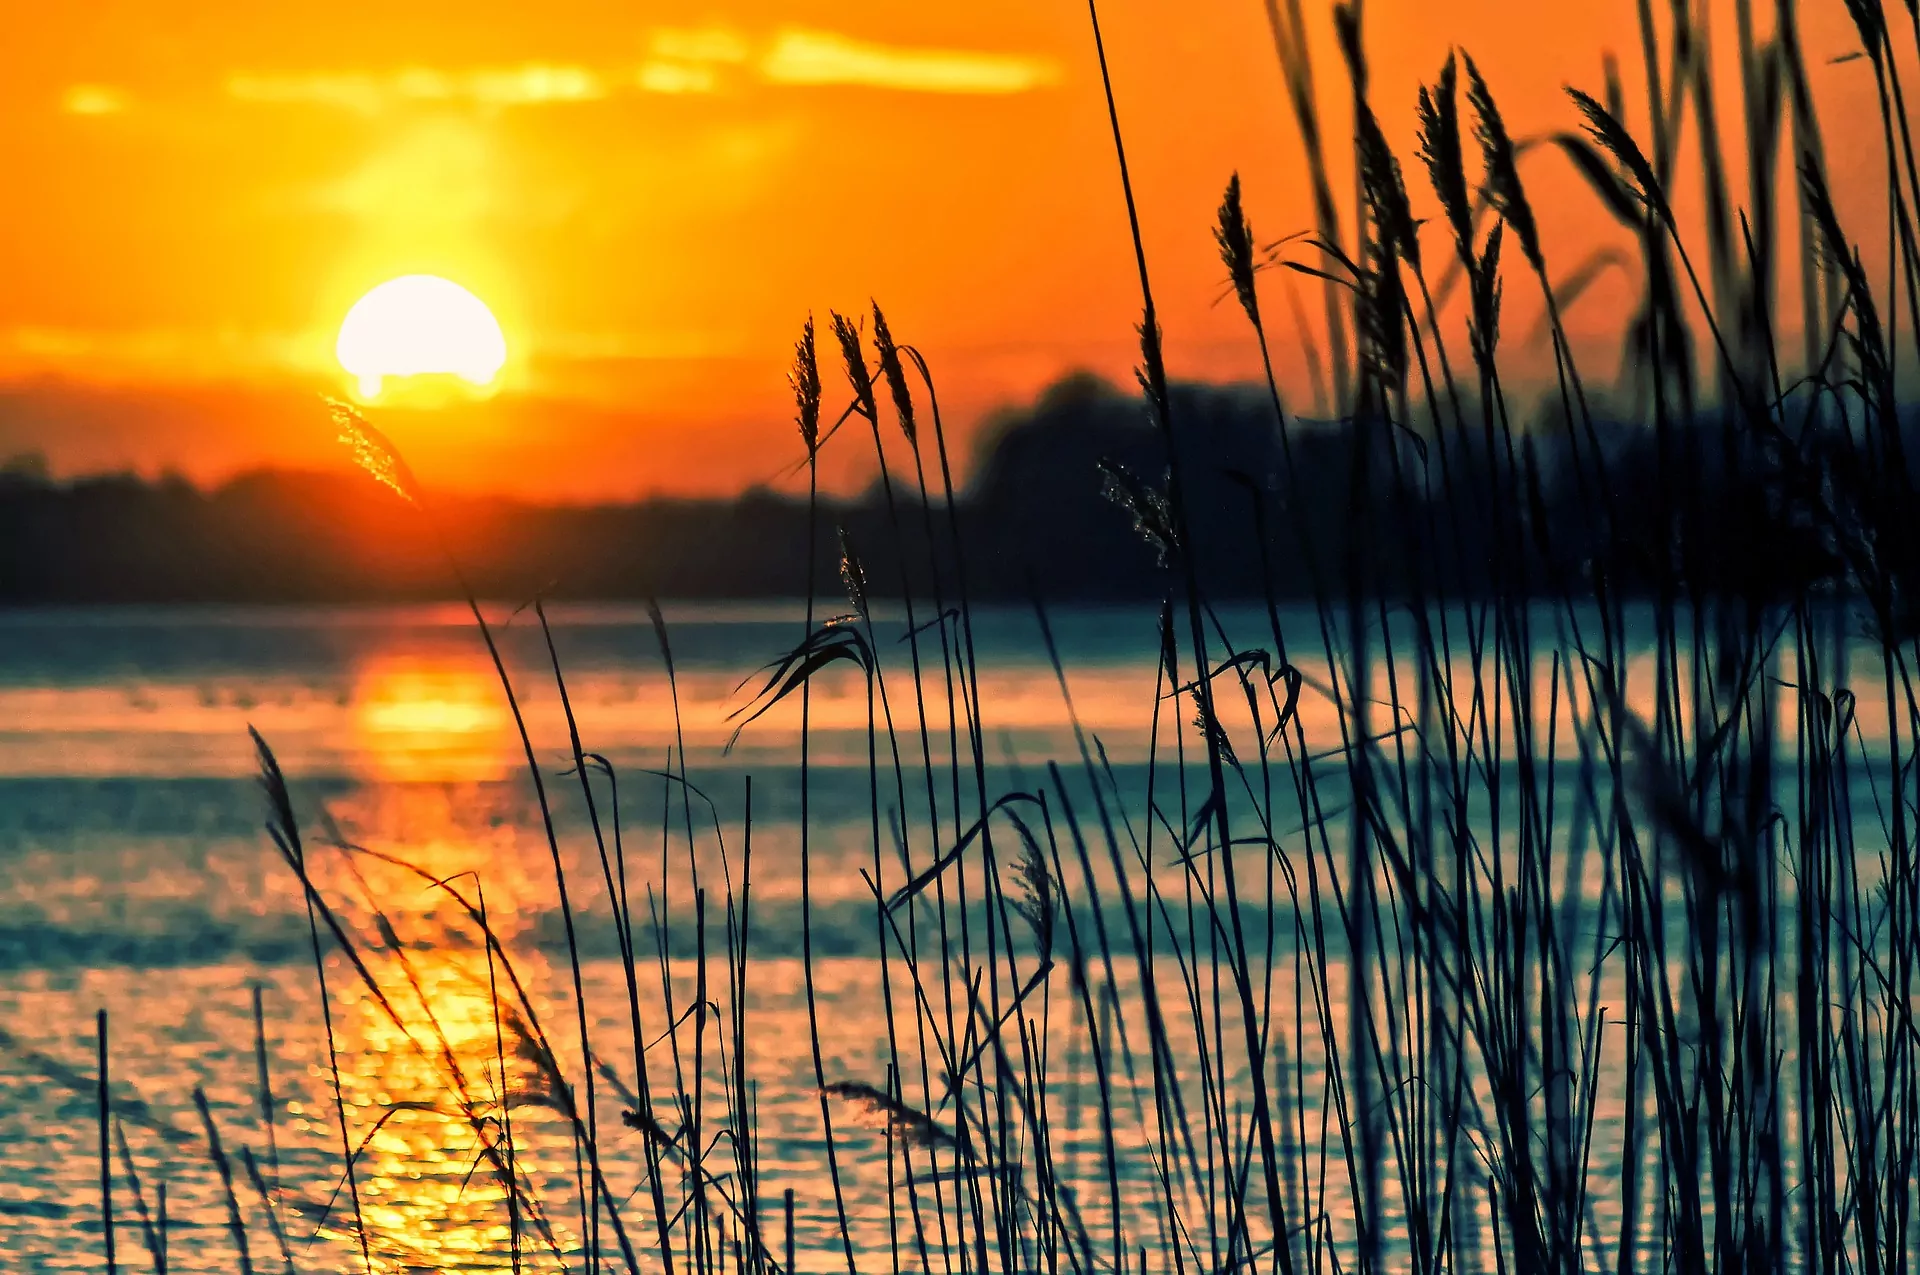 A beautiful image of the sun setting, a lake and long grass in the forefront of the shot help set the tone of this tranquil scene. The light of the sun shimmers on the waves of the water reflecting the rich orange tones of the light. Time-lapse of sunrises and sunsets.